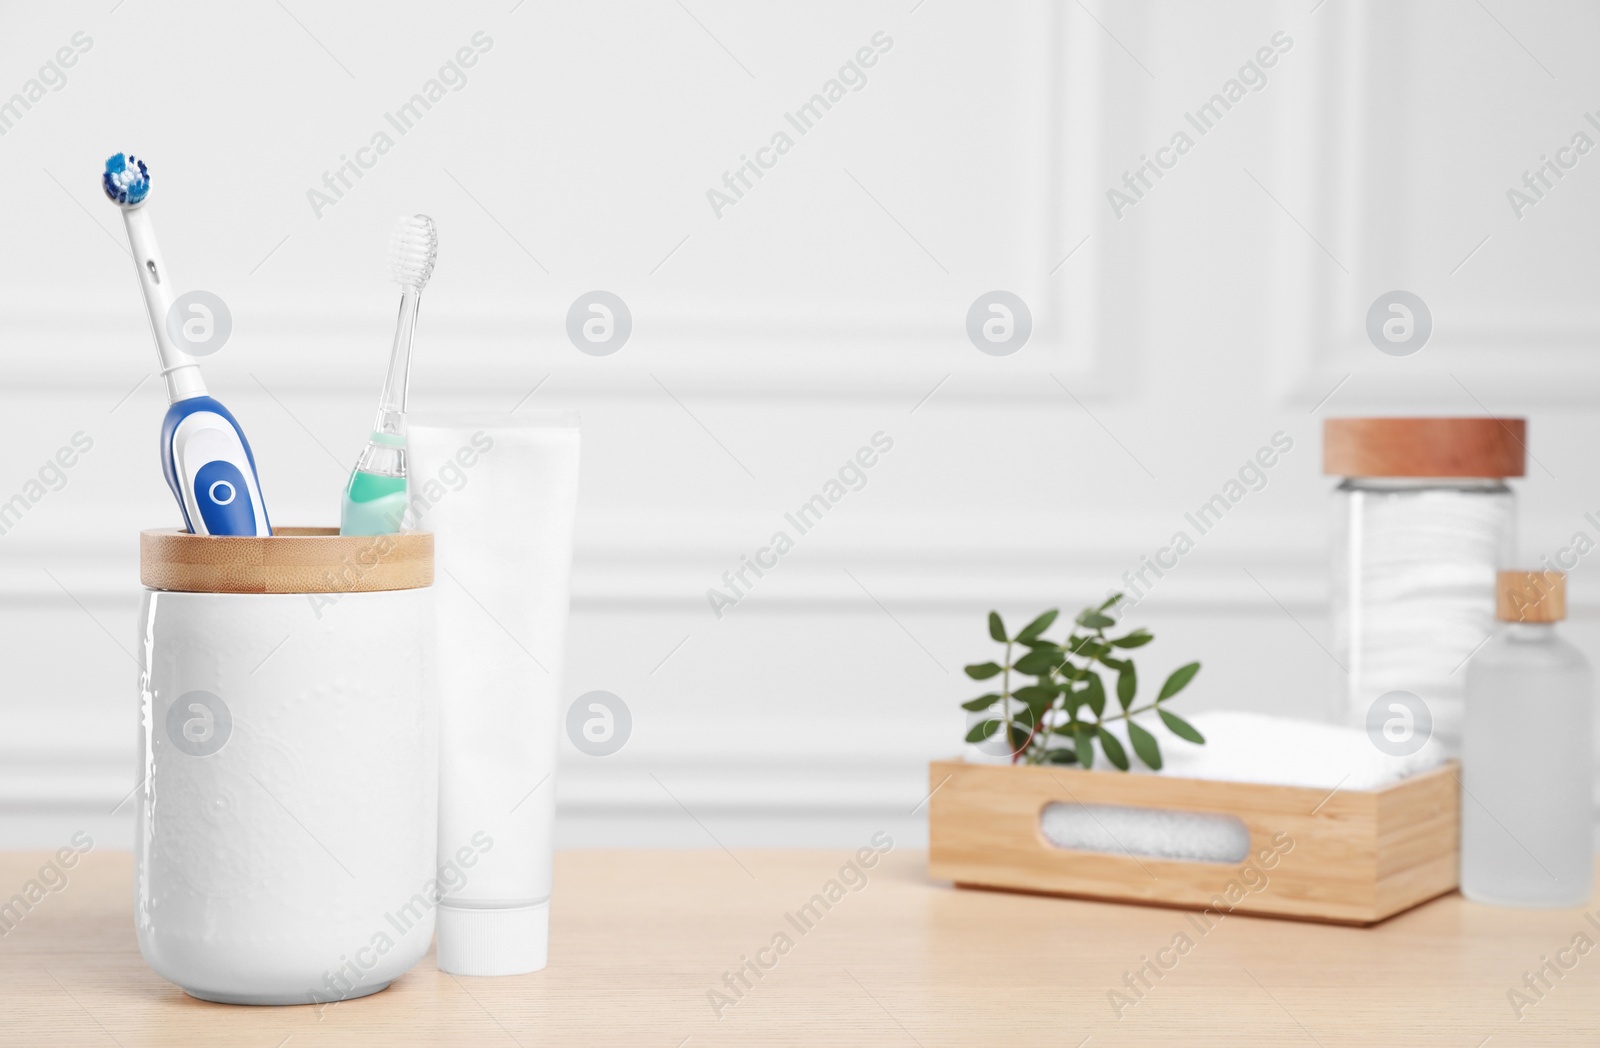 Photo of Electric toothbrushes, tube of paste and toiletries on wooden table